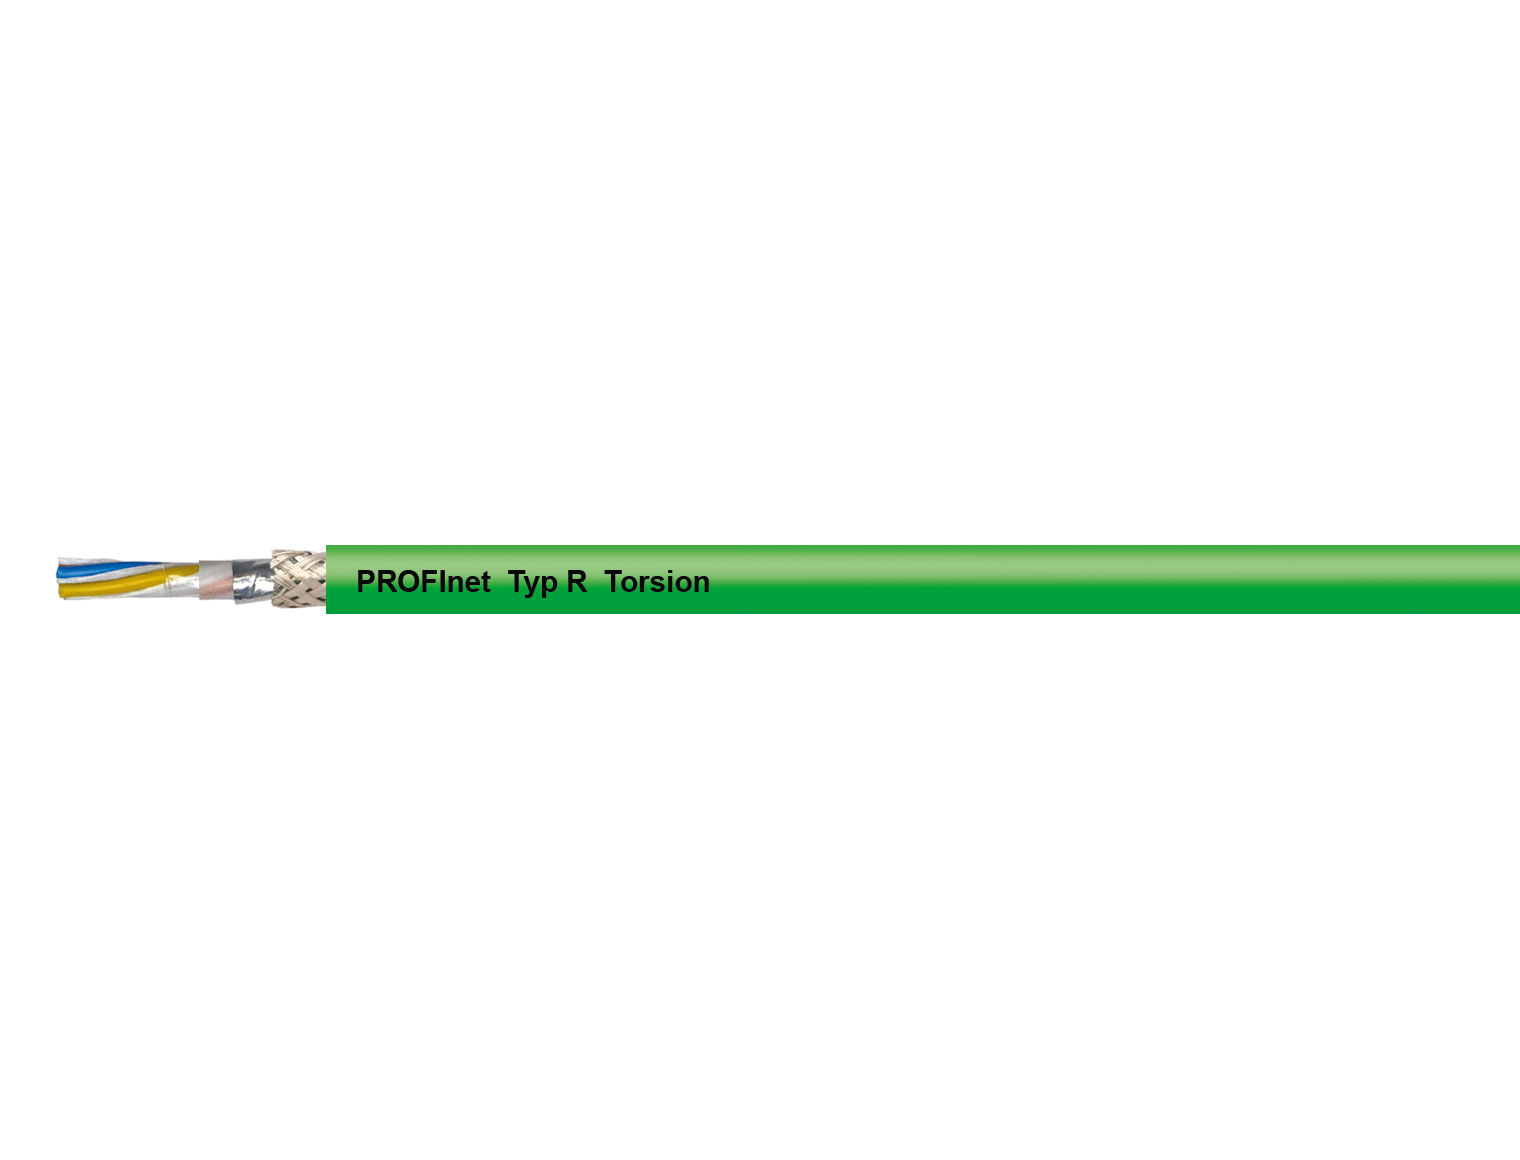 Industrial Ethernet cable, Kat. 5e for PROFInet systems, up to 100 MHz, PUR outer sheath, torsion rated